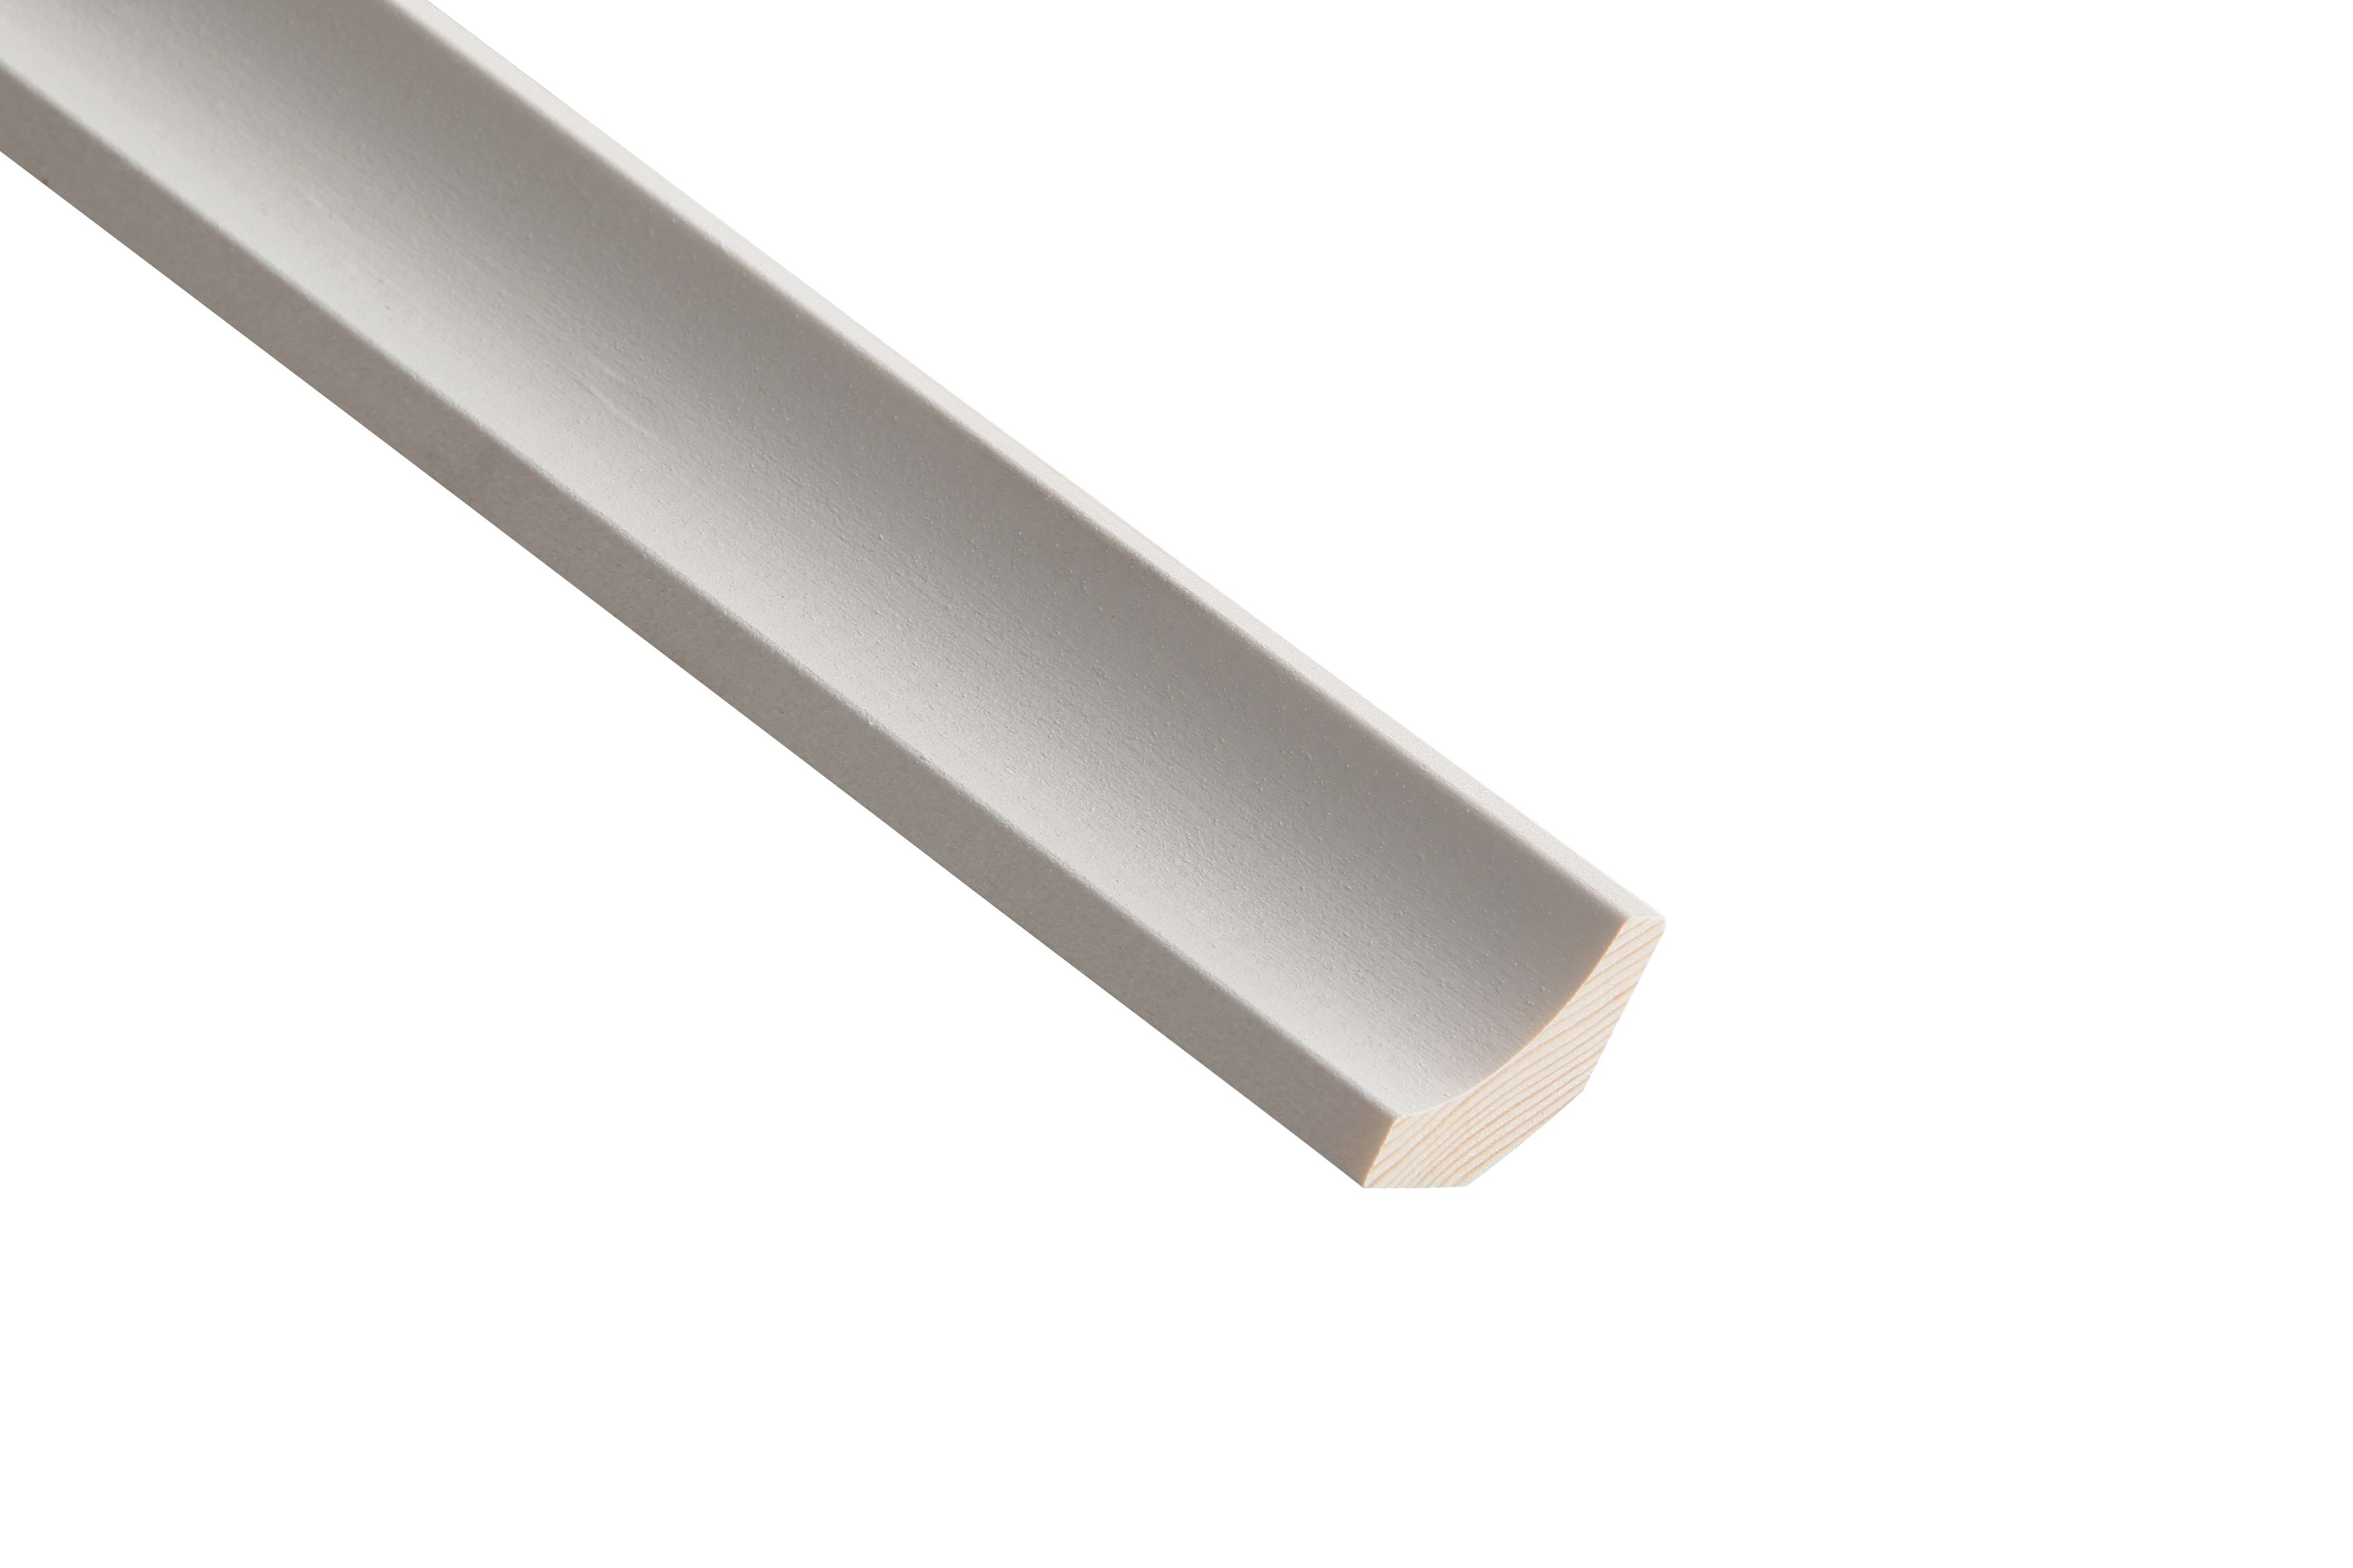 Image of Wickes Primed White Scotia Moulding - 21 x 21 x 2400mm